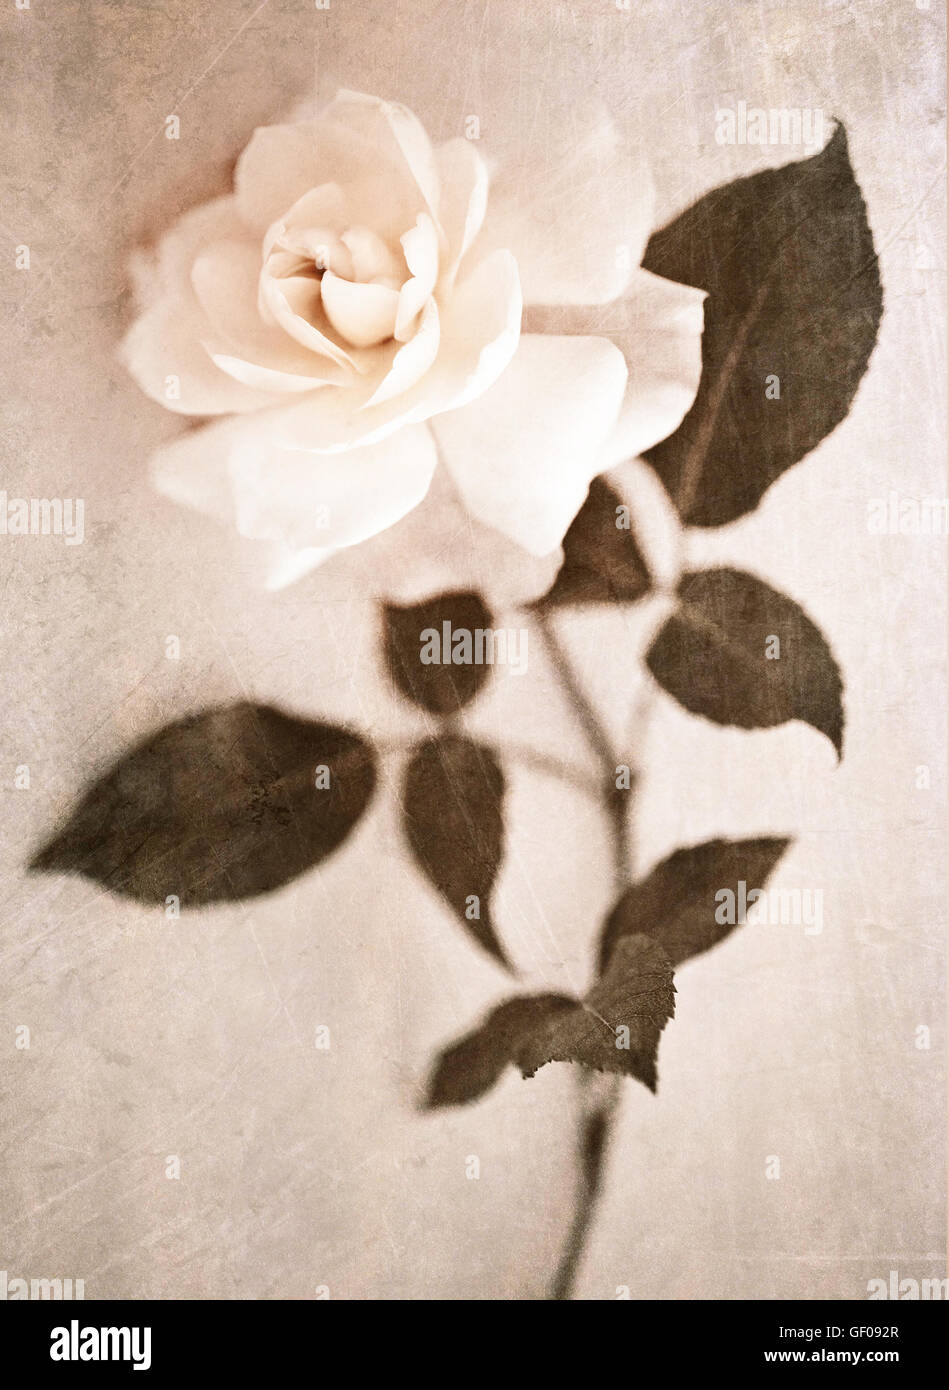 Garden Rose Flower White Sepia Floral with Textured Background Stock Photo